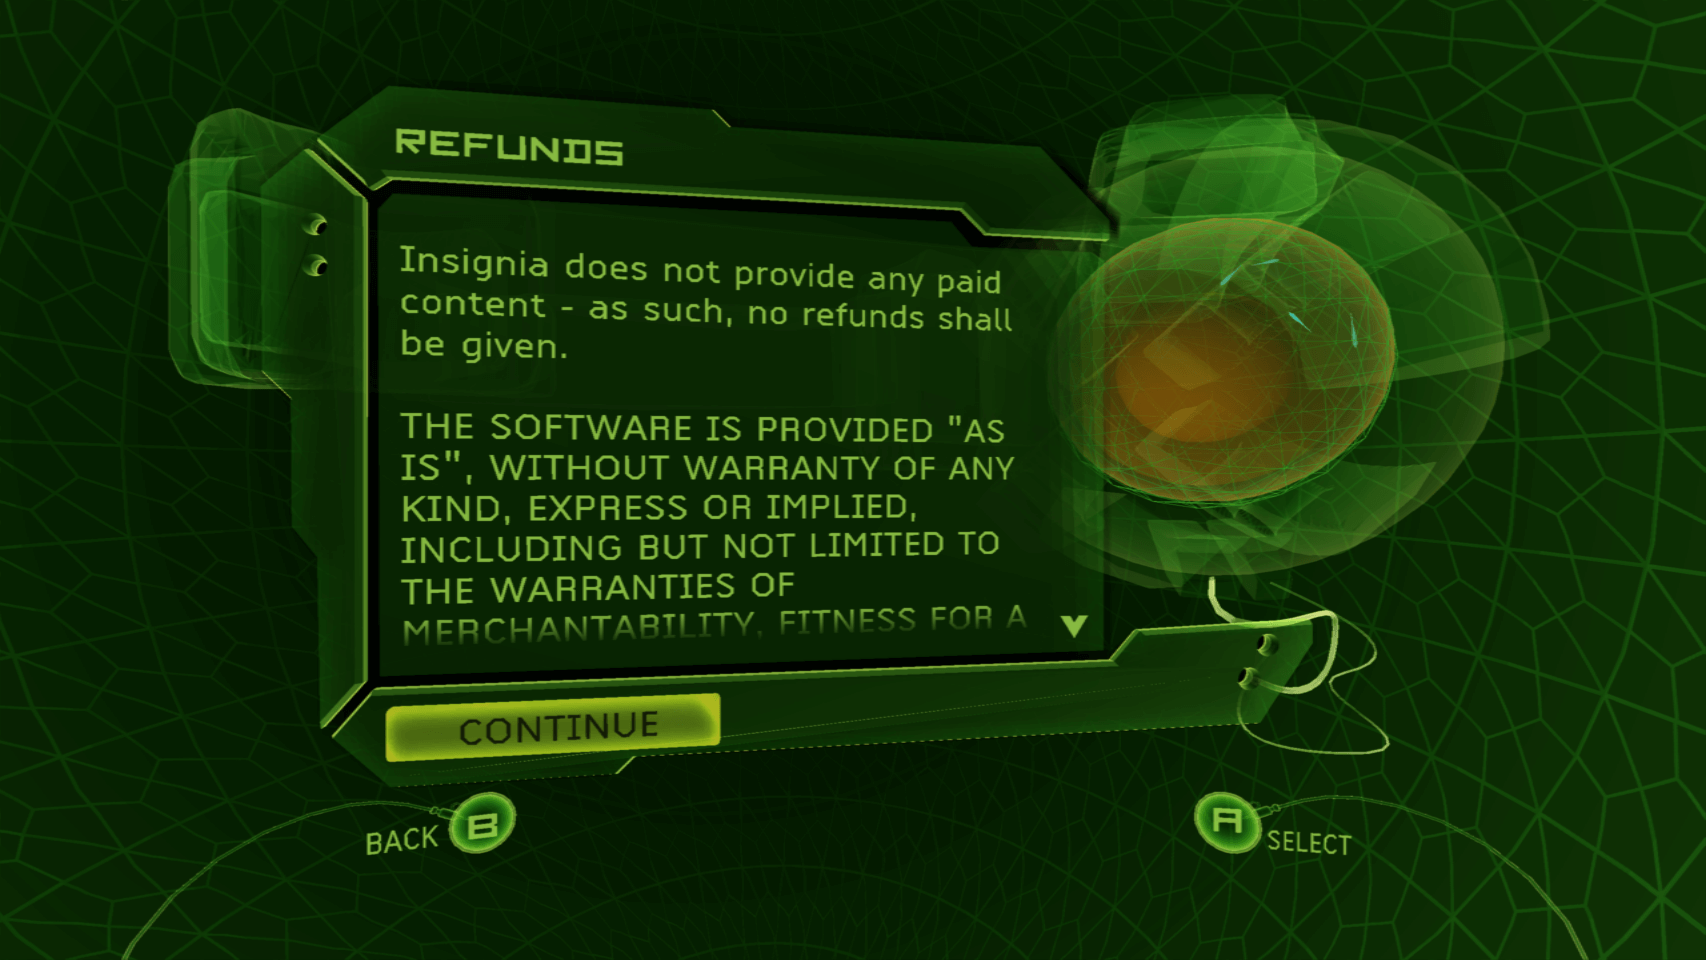 Refund Information screen highlighting that Insignia does not provide any paid content, and that the software is provided as-is.